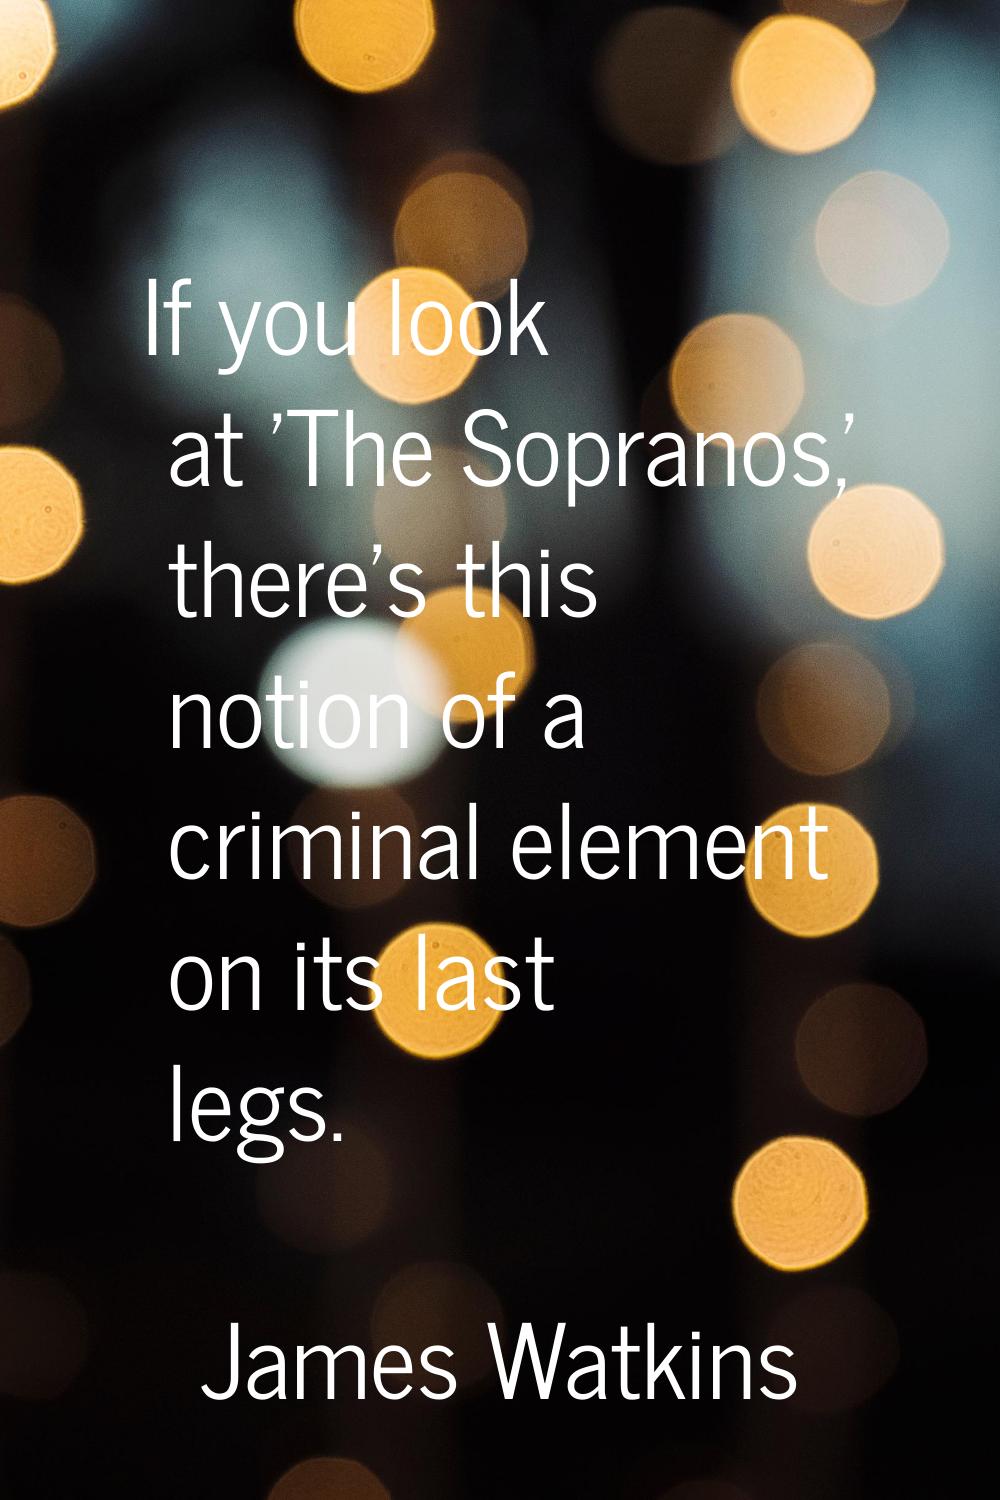 If you look at 'The Sopranos,' there's this notion of a criminal element on its last legs.